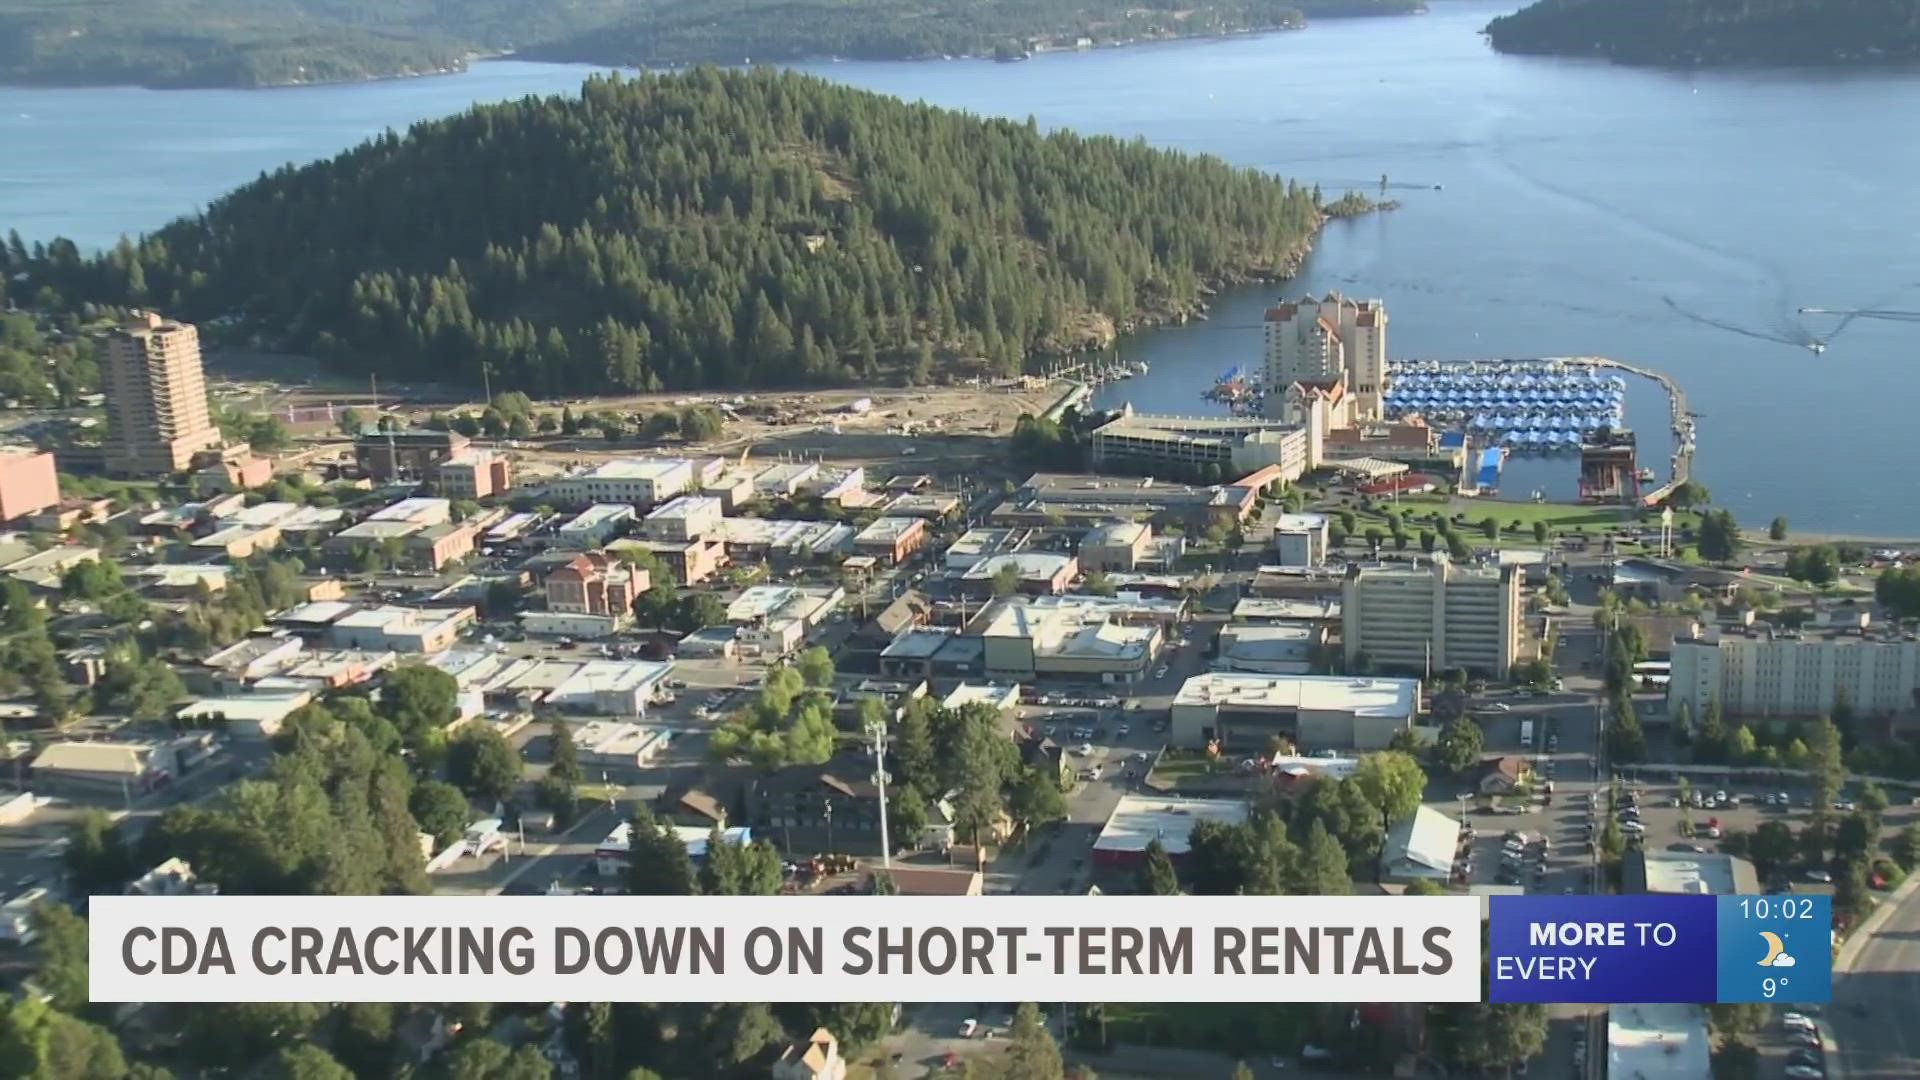 The city recently released a proposal to crack down on illegal short-term rentals. If approved, operating without a permit could cost thousands of dollars.